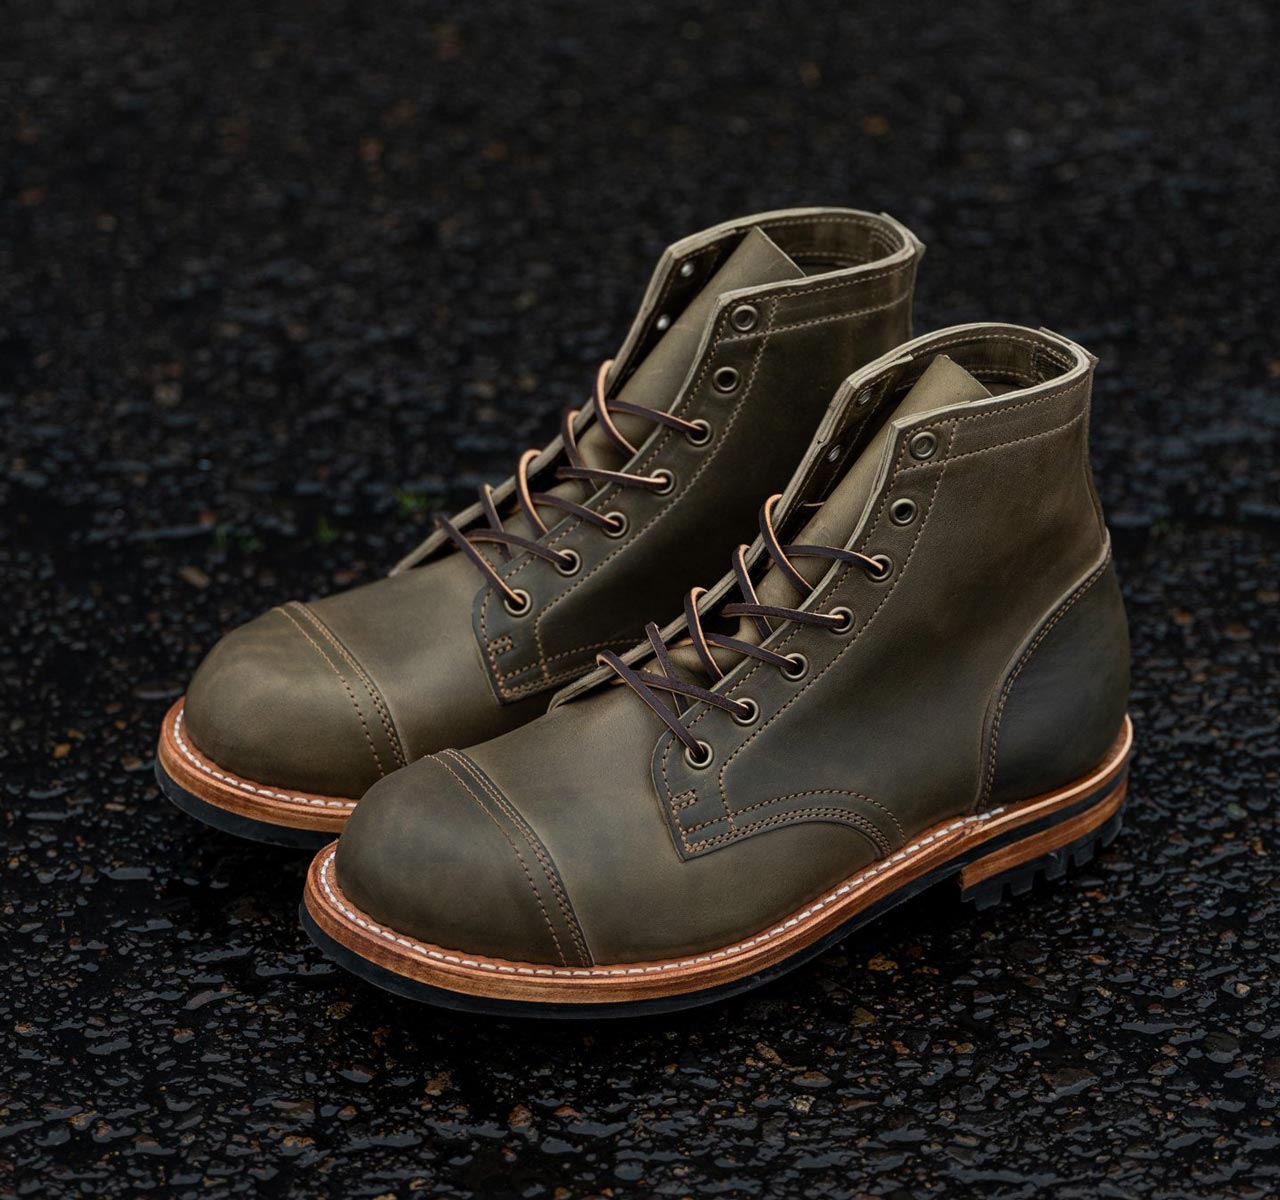 Truman Boot Co.’s New Vintage Military Horse Rump 7-Eye Is Made To Order